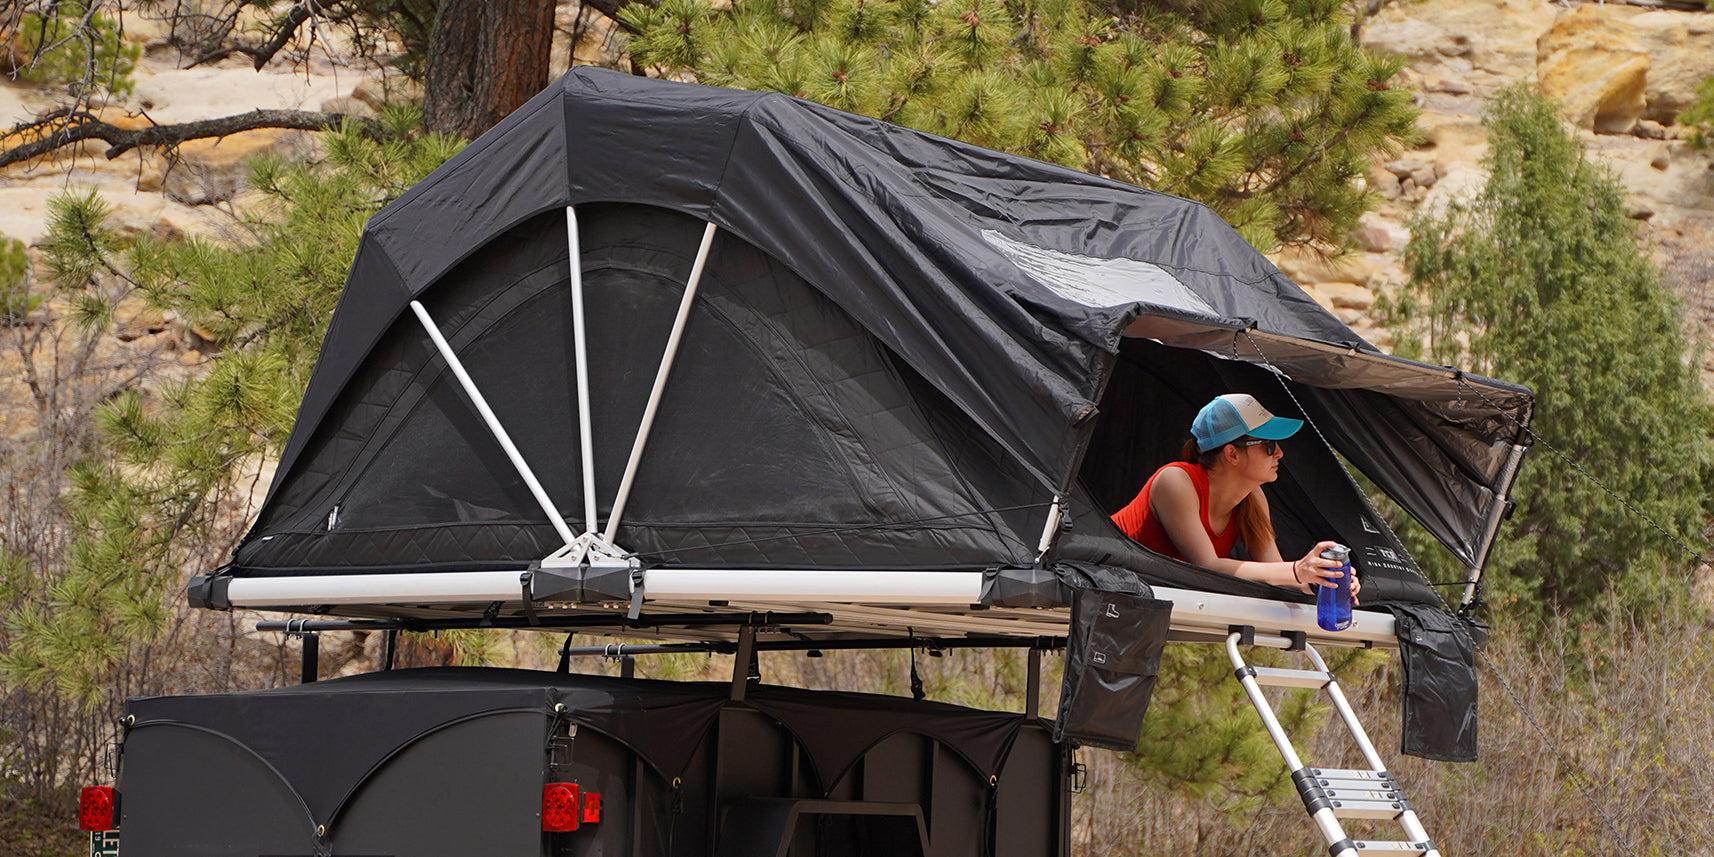 LittleGiant Trailer with a Roof Top Tent